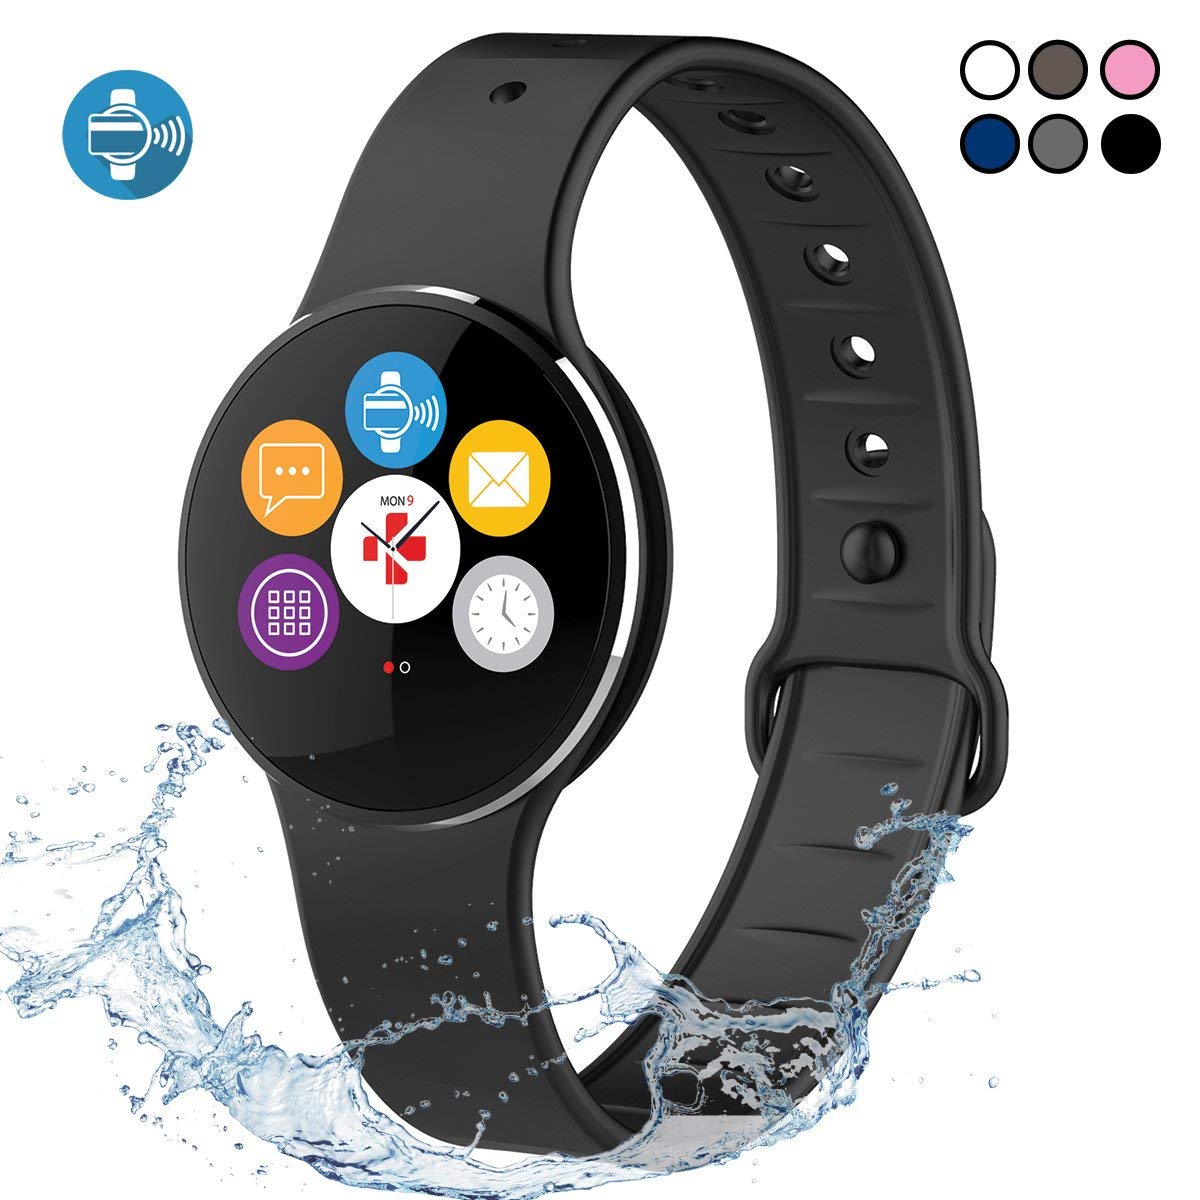 MyKronoz ZeCircle2 - Activity Tracker with Color Touchscreen, Smart Notifications and contactless Payment (Black/Black) 1